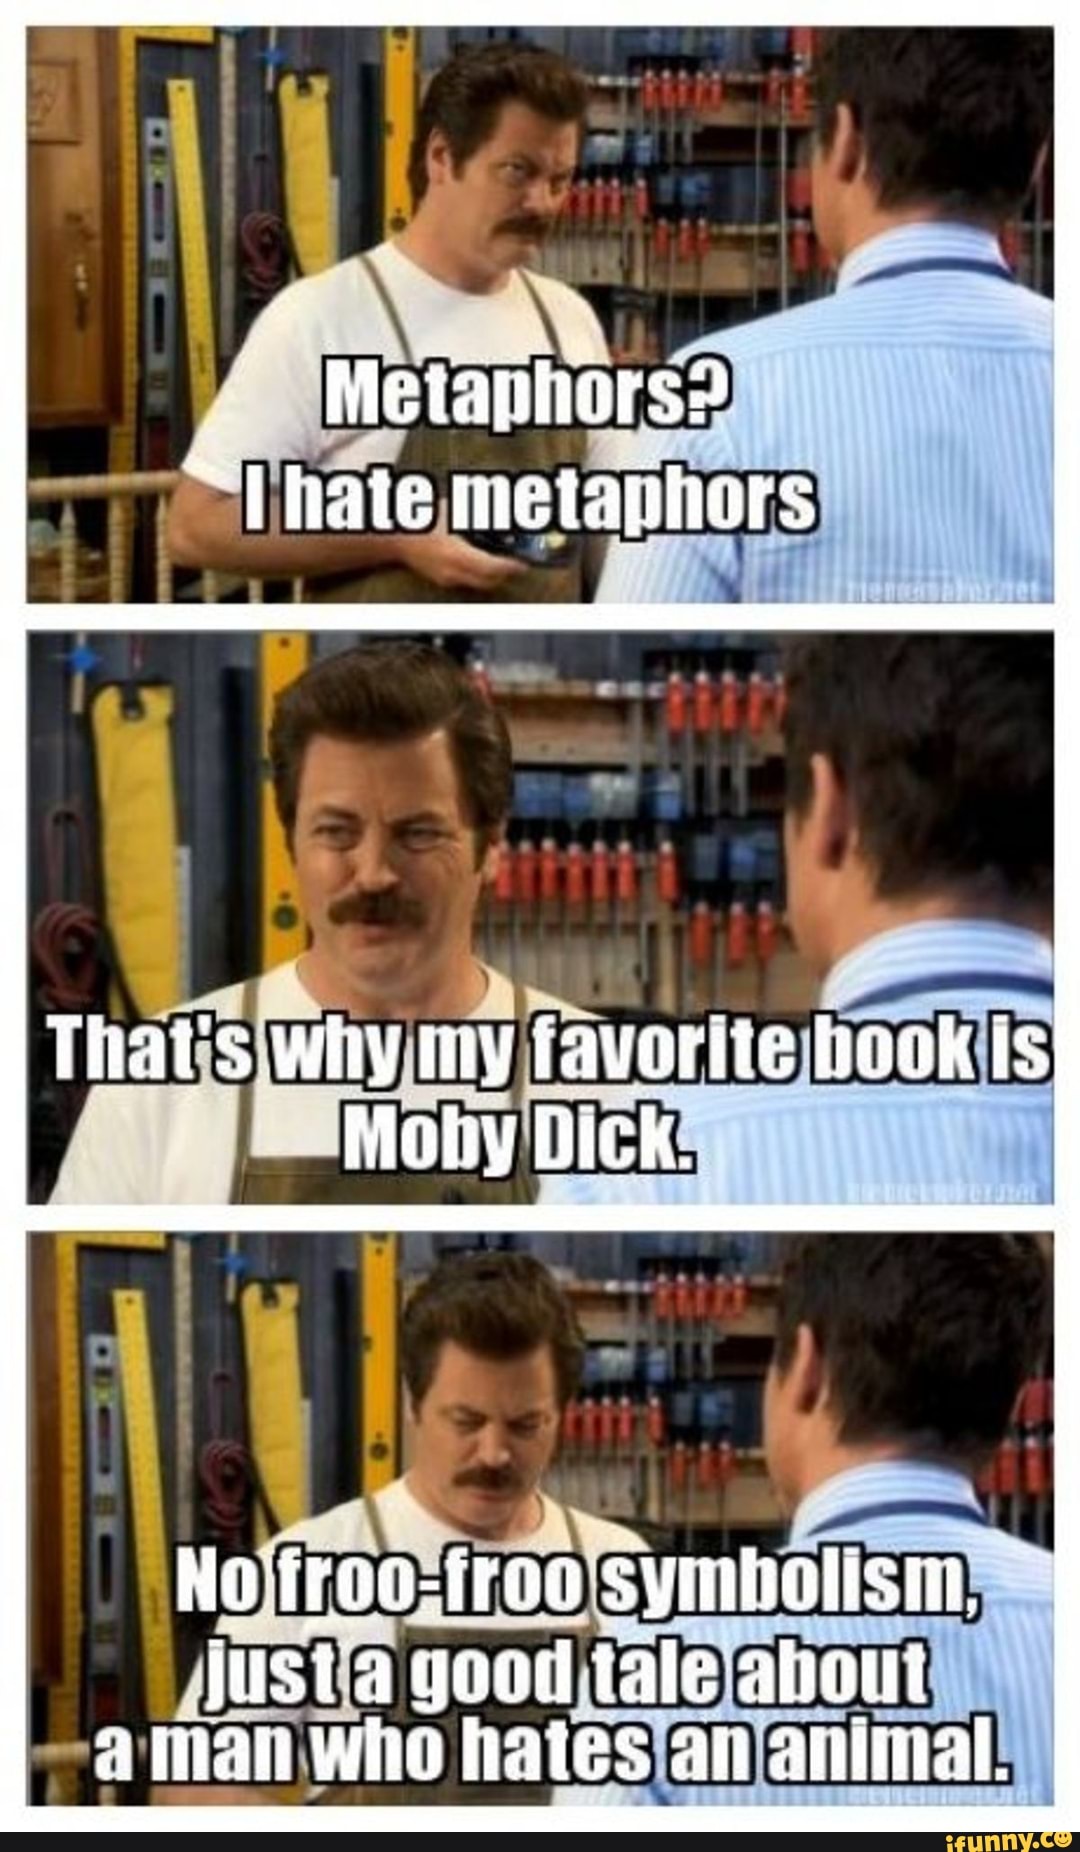 Moby dick ron swanson